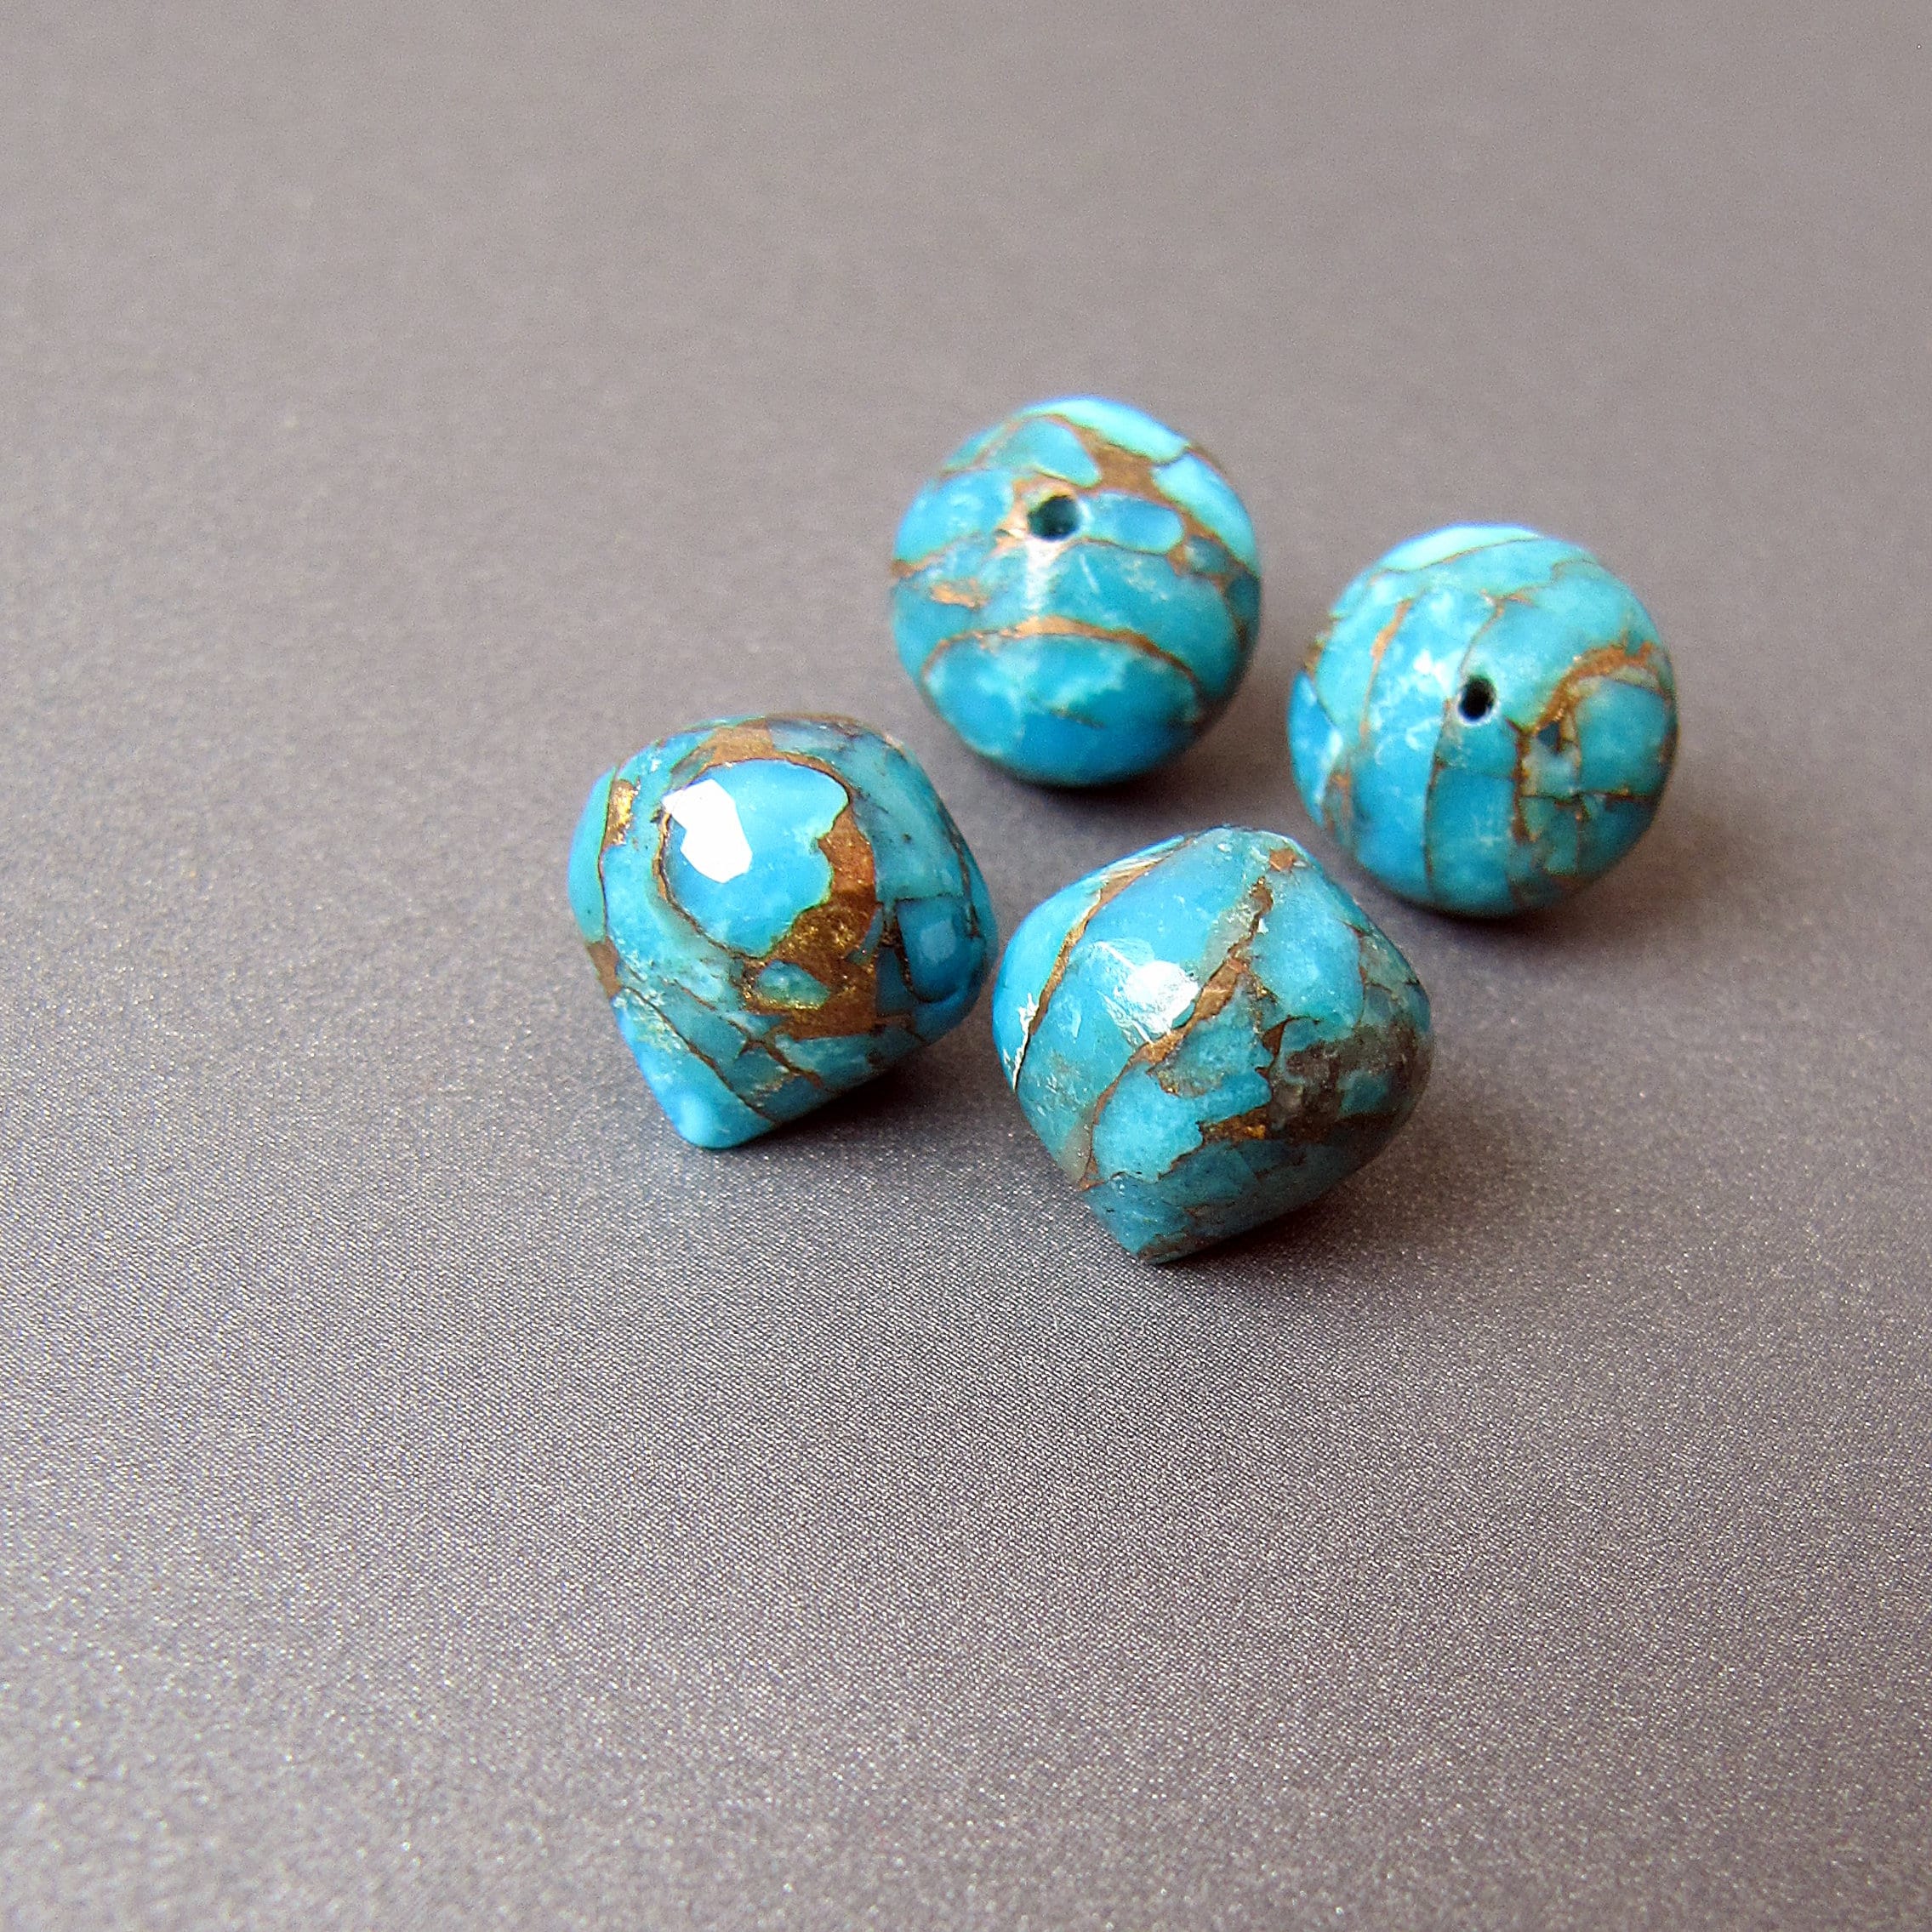 Synthetic Turquoise with Matrix Half Moon Beads Pack of 7 - Turquoise Multi  - Trims By The Yard